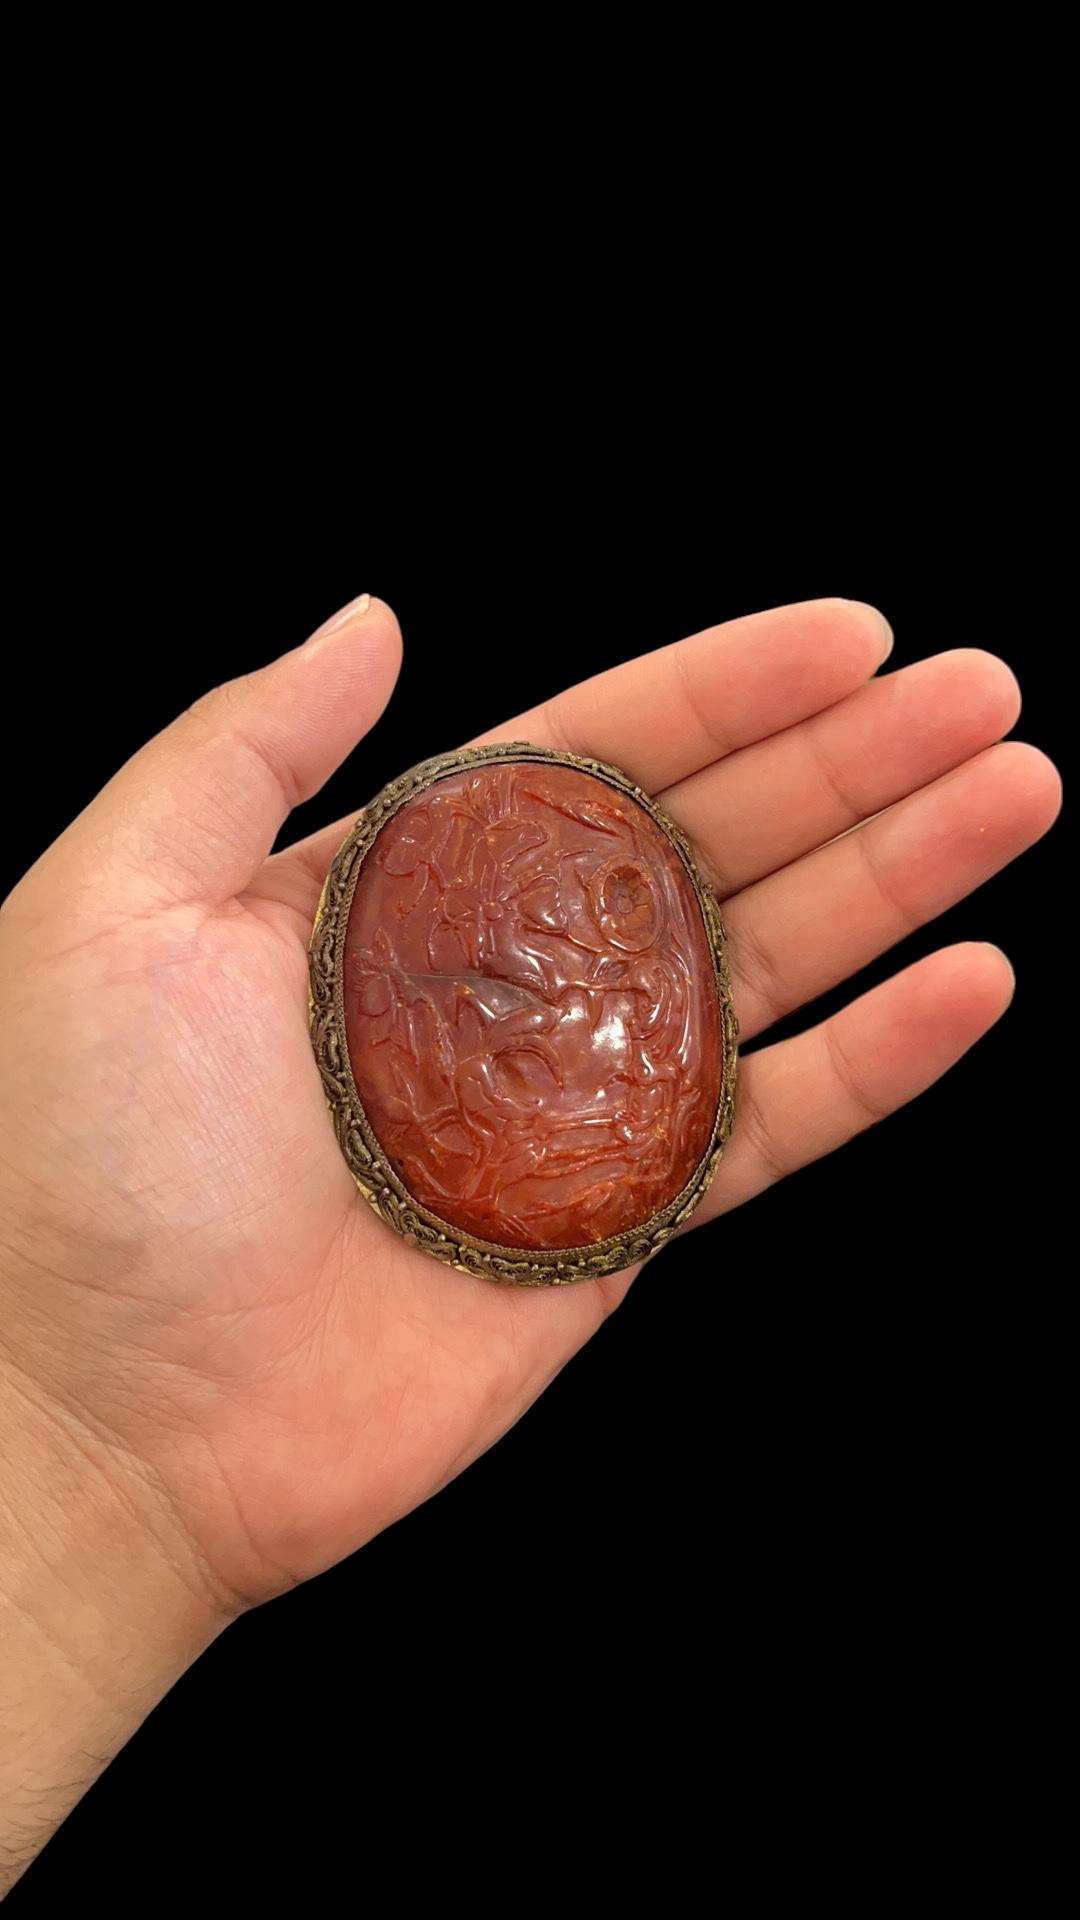 Uncut Rare Exceptional Antique Chinese Carved Amber Brooch For Sale